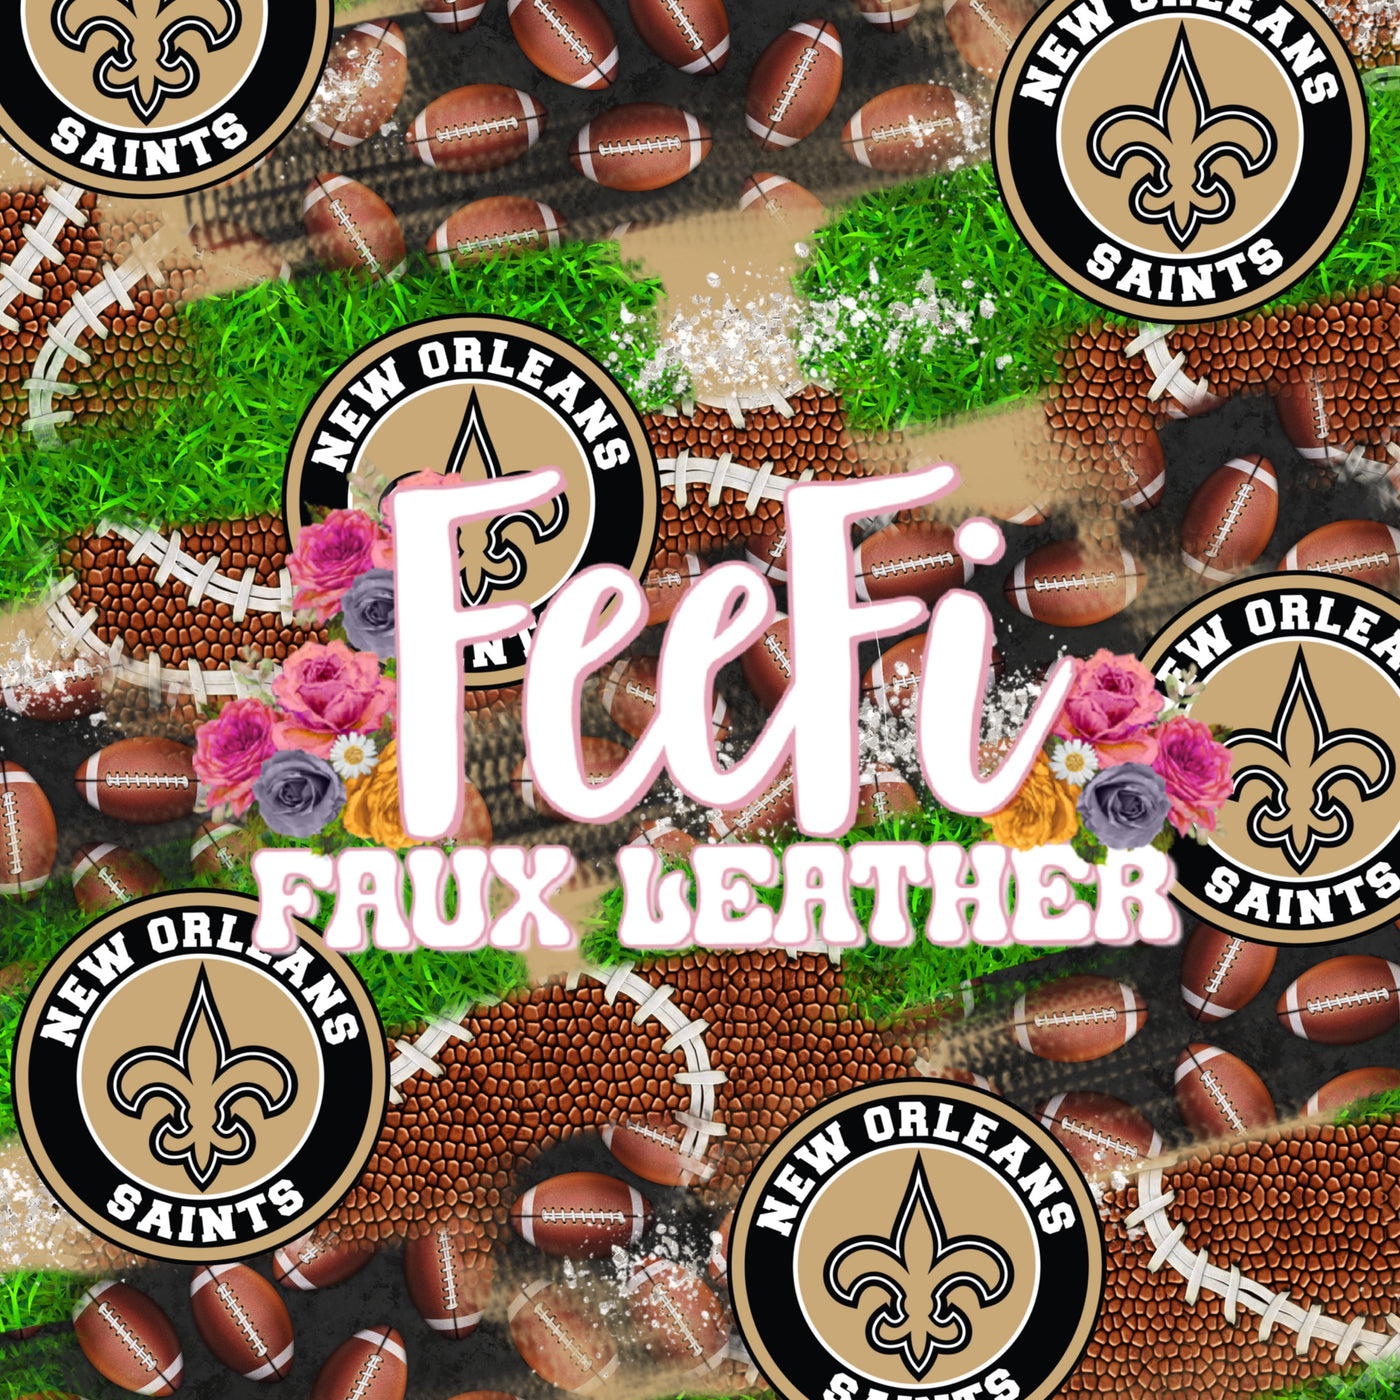 The Saints Football Printed Faux Leather Sheet Litchi has a pebble like feel with bright colors